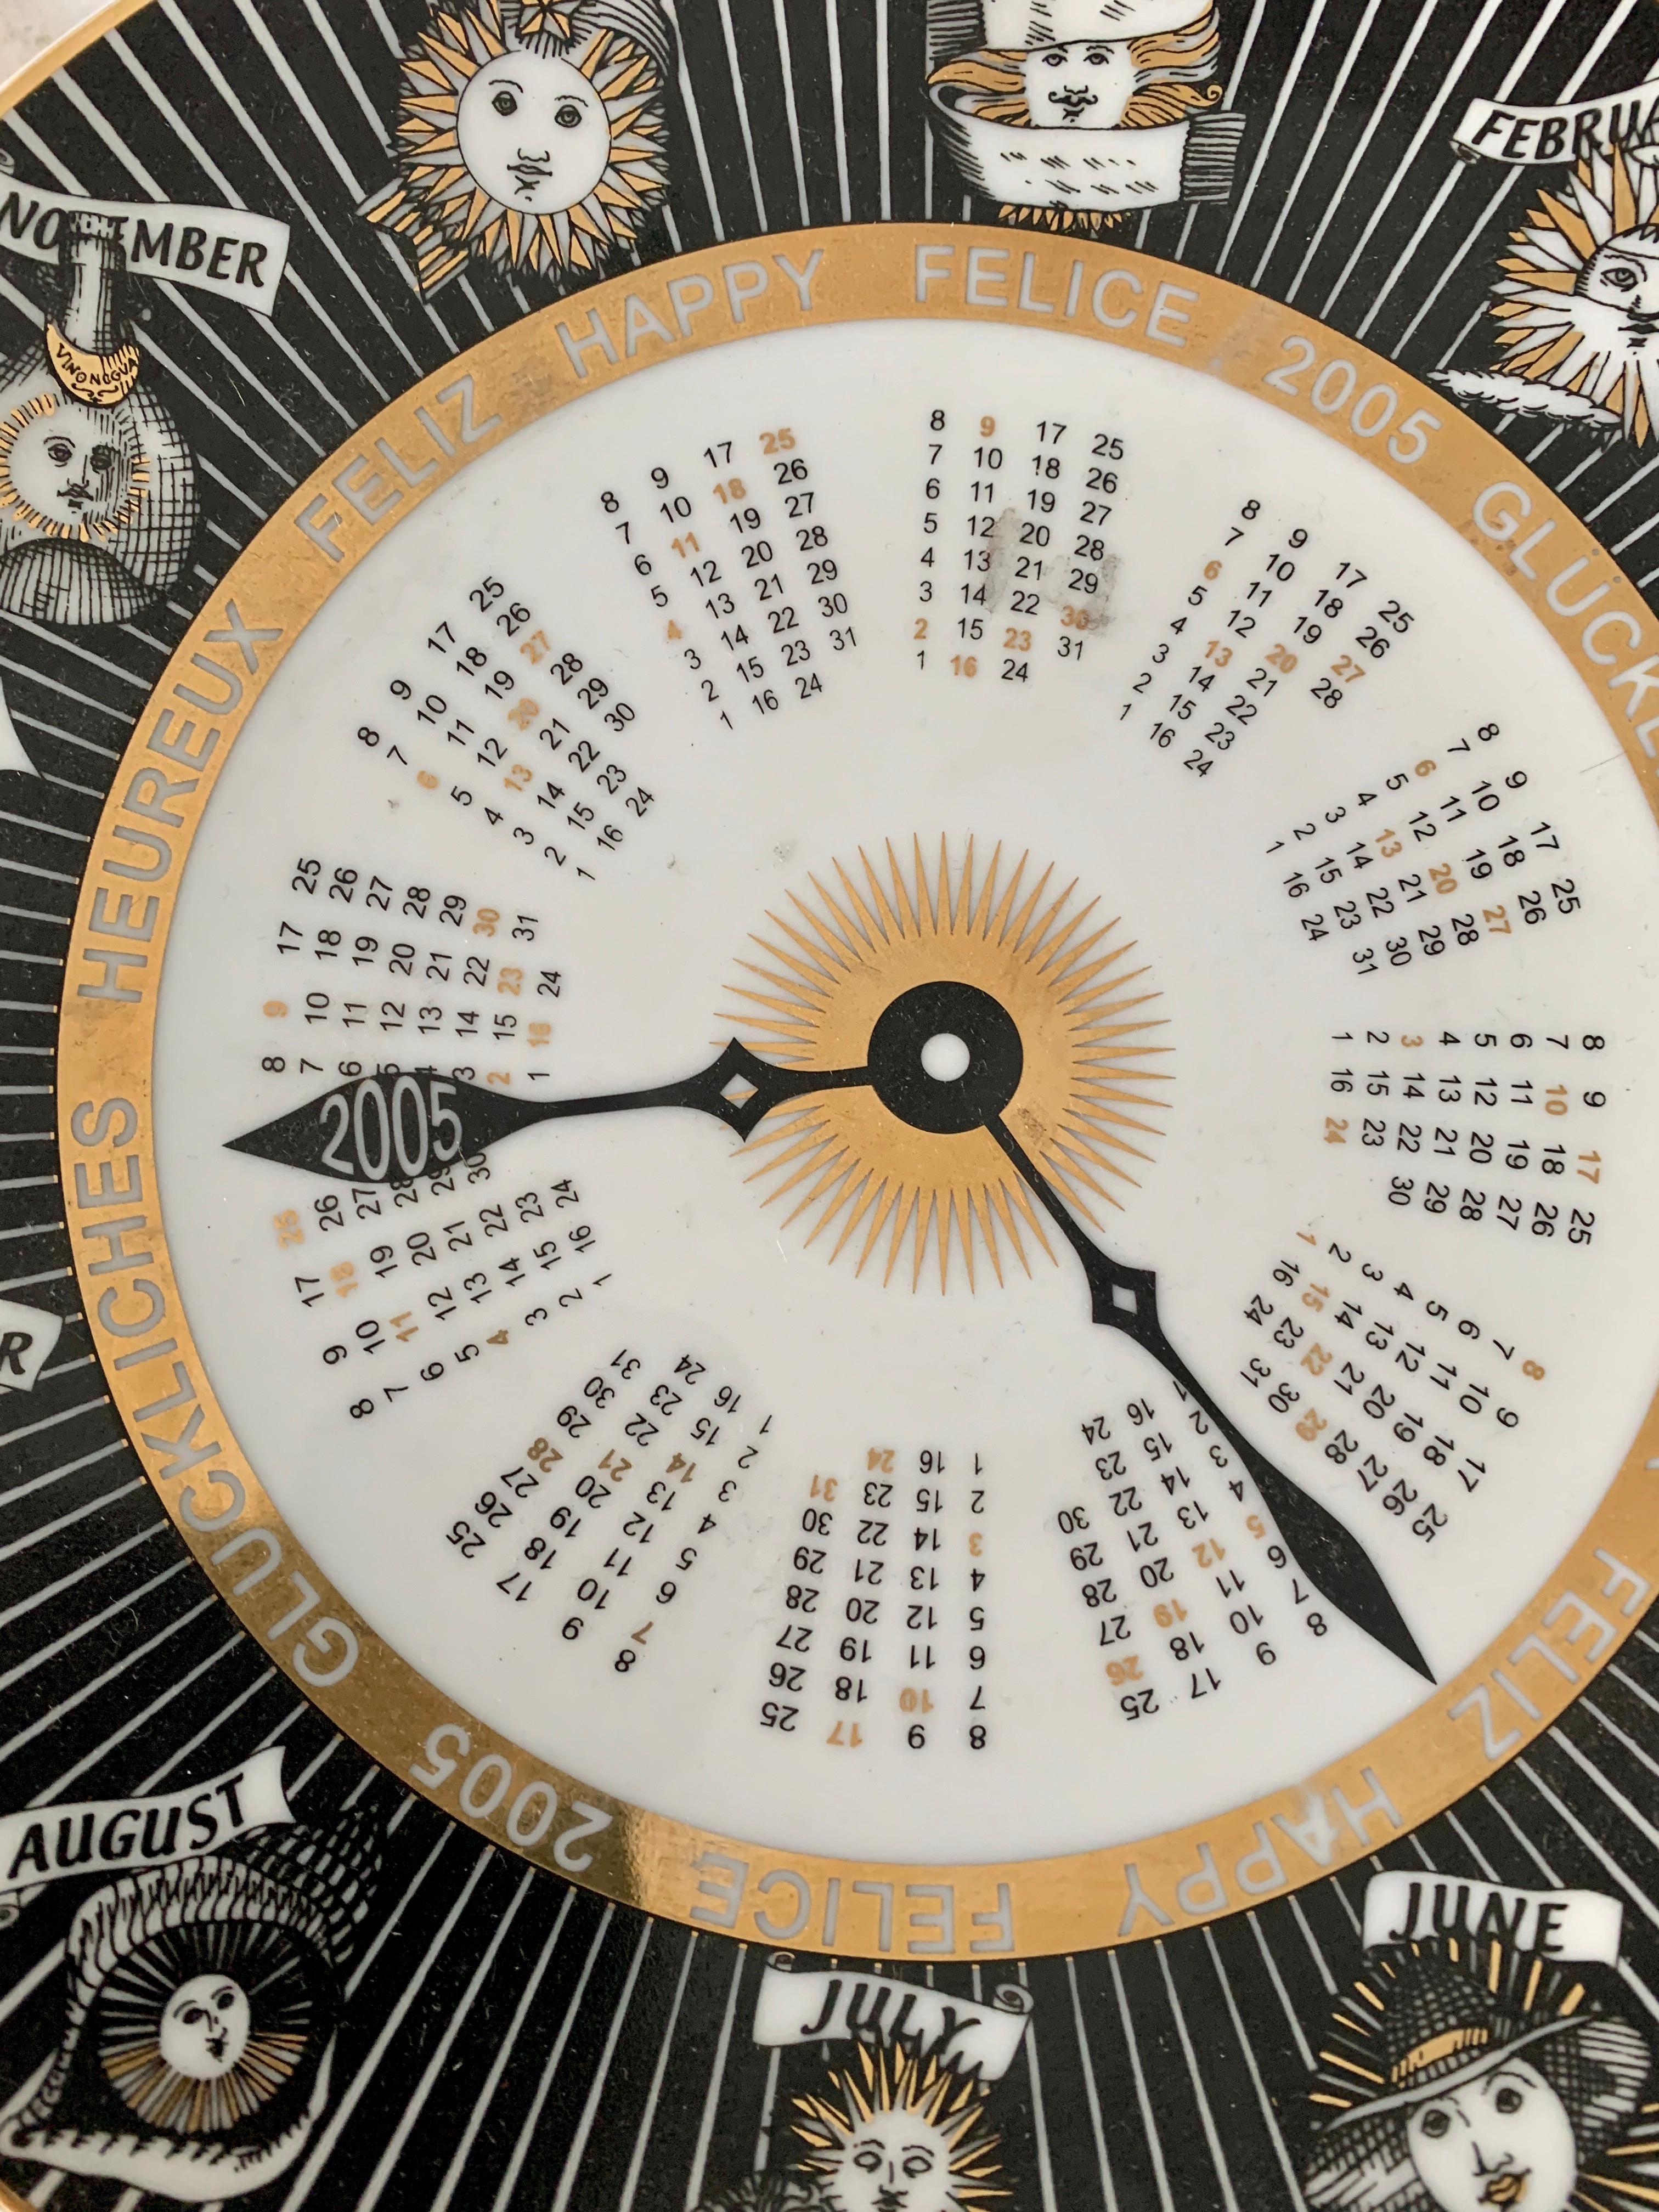 Pair of Italian Fornasetti signed and numbered calendar astrological plates - the plates are Classic Piero Fornasetti - A wonderful design, indicating all 12 horoscopes and calendar. Each plate has pre-drilled holes for hanging. Hand finished in